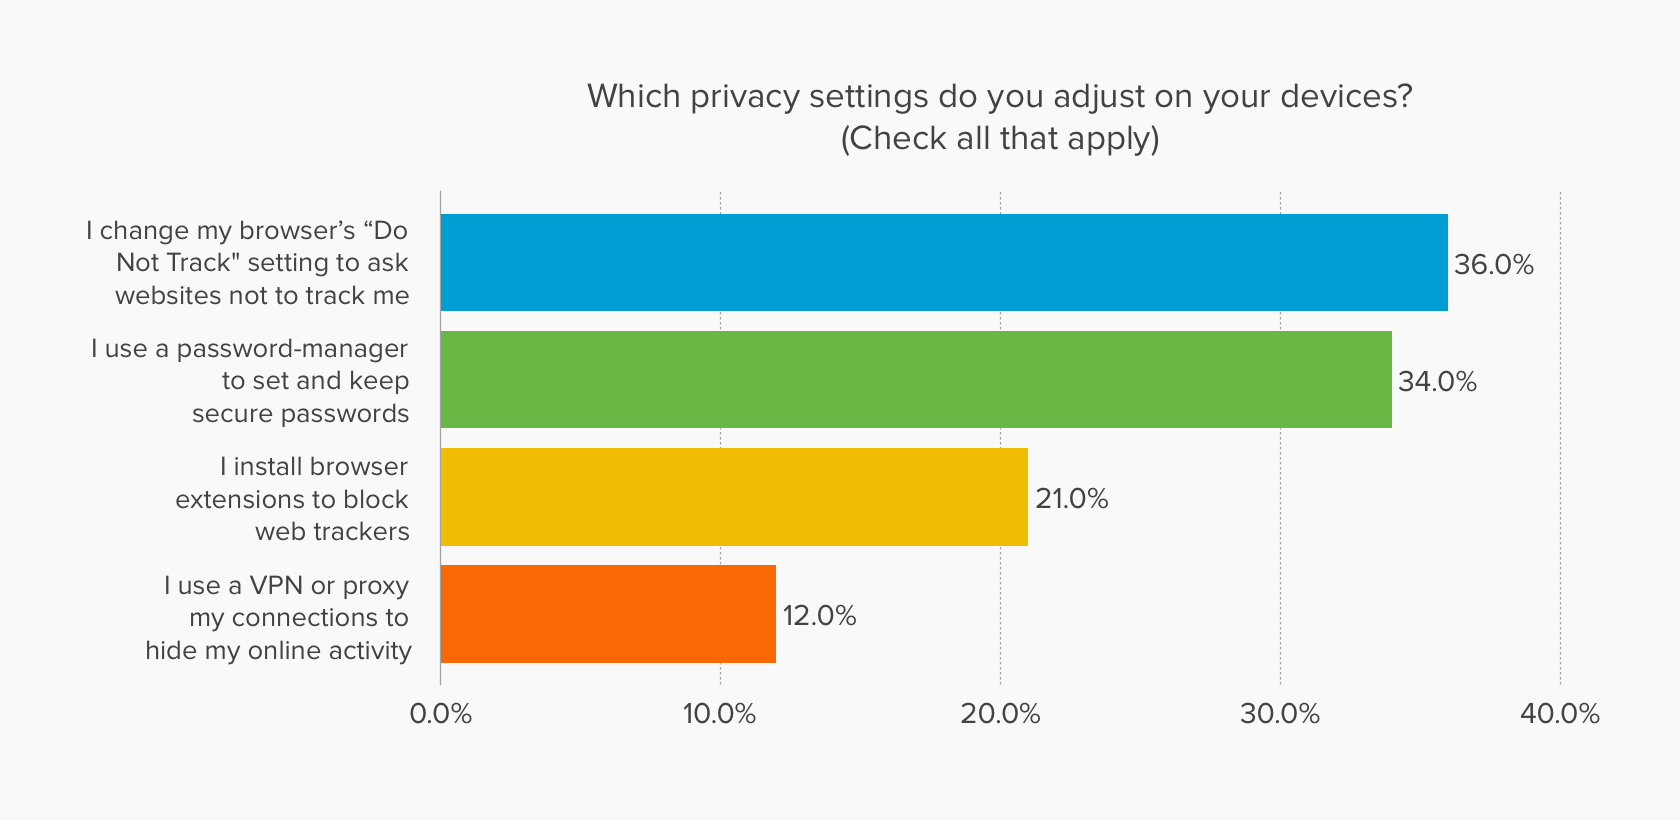 Chart showing privacy settings that users adjust on their devices.